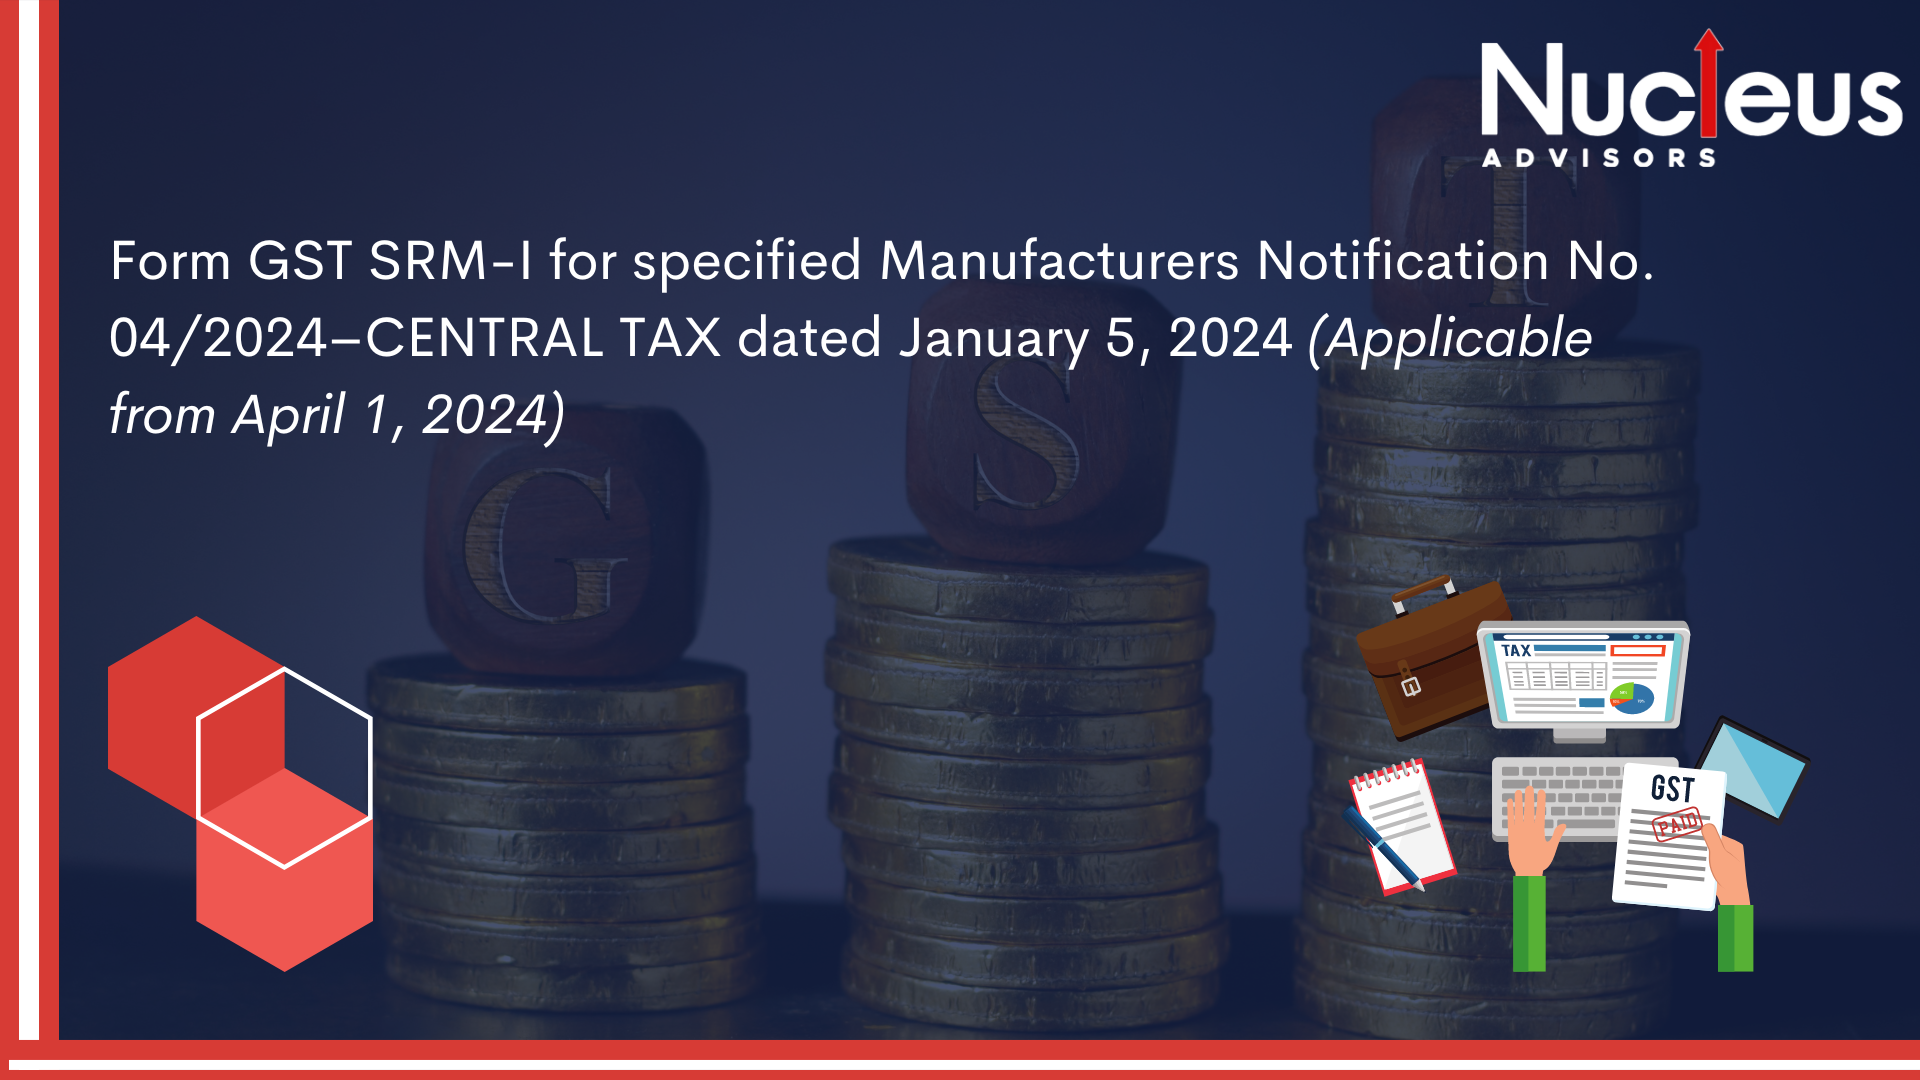 Form GST SRM-I for specified Manufacturers Notification No. 04/2024–CENTRAL TAX dated January 5, 2024 (Applicable from April 1, 2024)